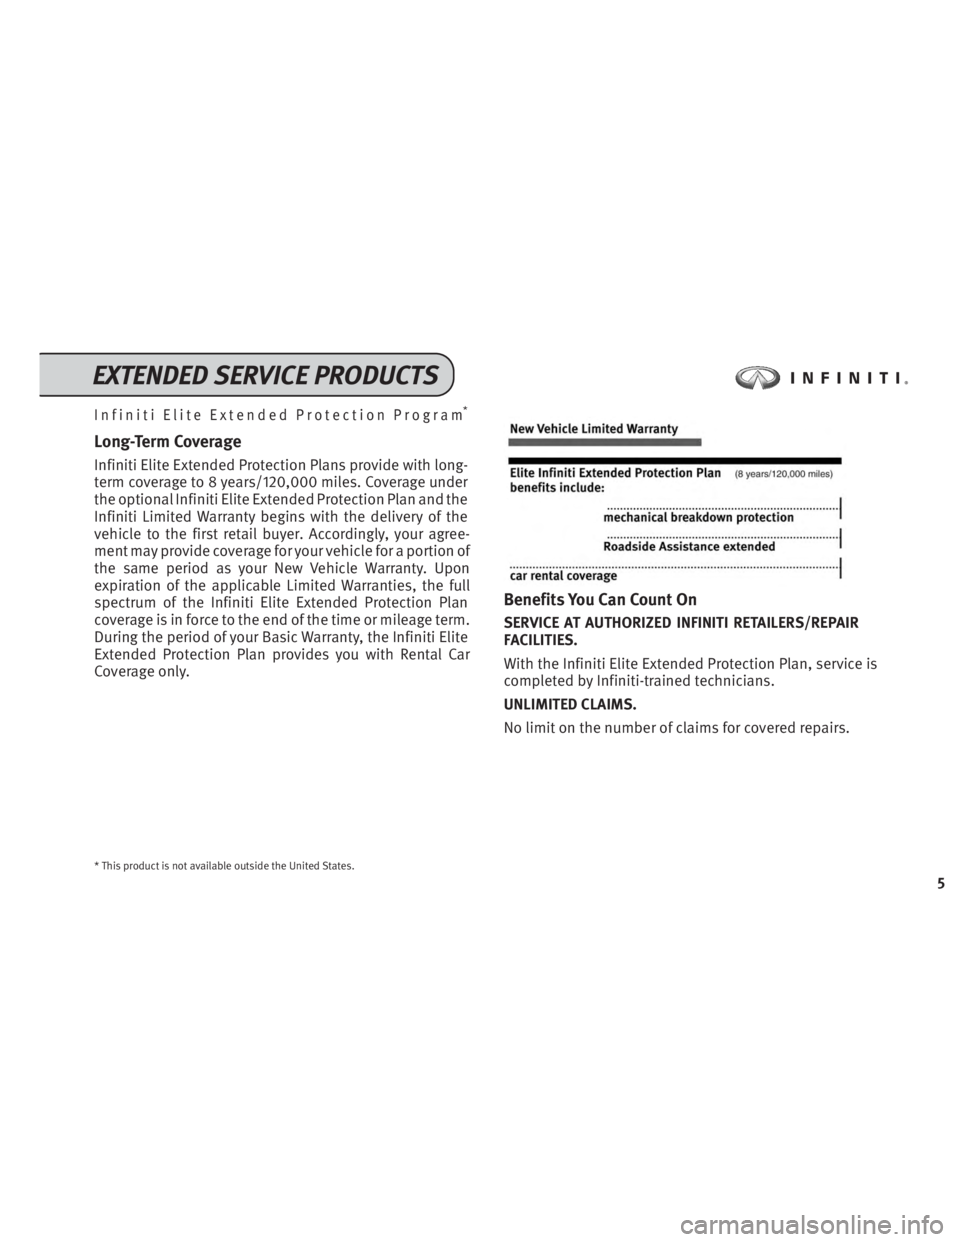 INFINITI Q70 2014  Service And Maintenance Guide Infiniti Elite Extended Protection Program*
Long-Term Coverage
Infiniti Elite Extended Protection Plans provide with long-
term coverage to 8 years/120,000 miles. Coverage under
the optional Infiniti 